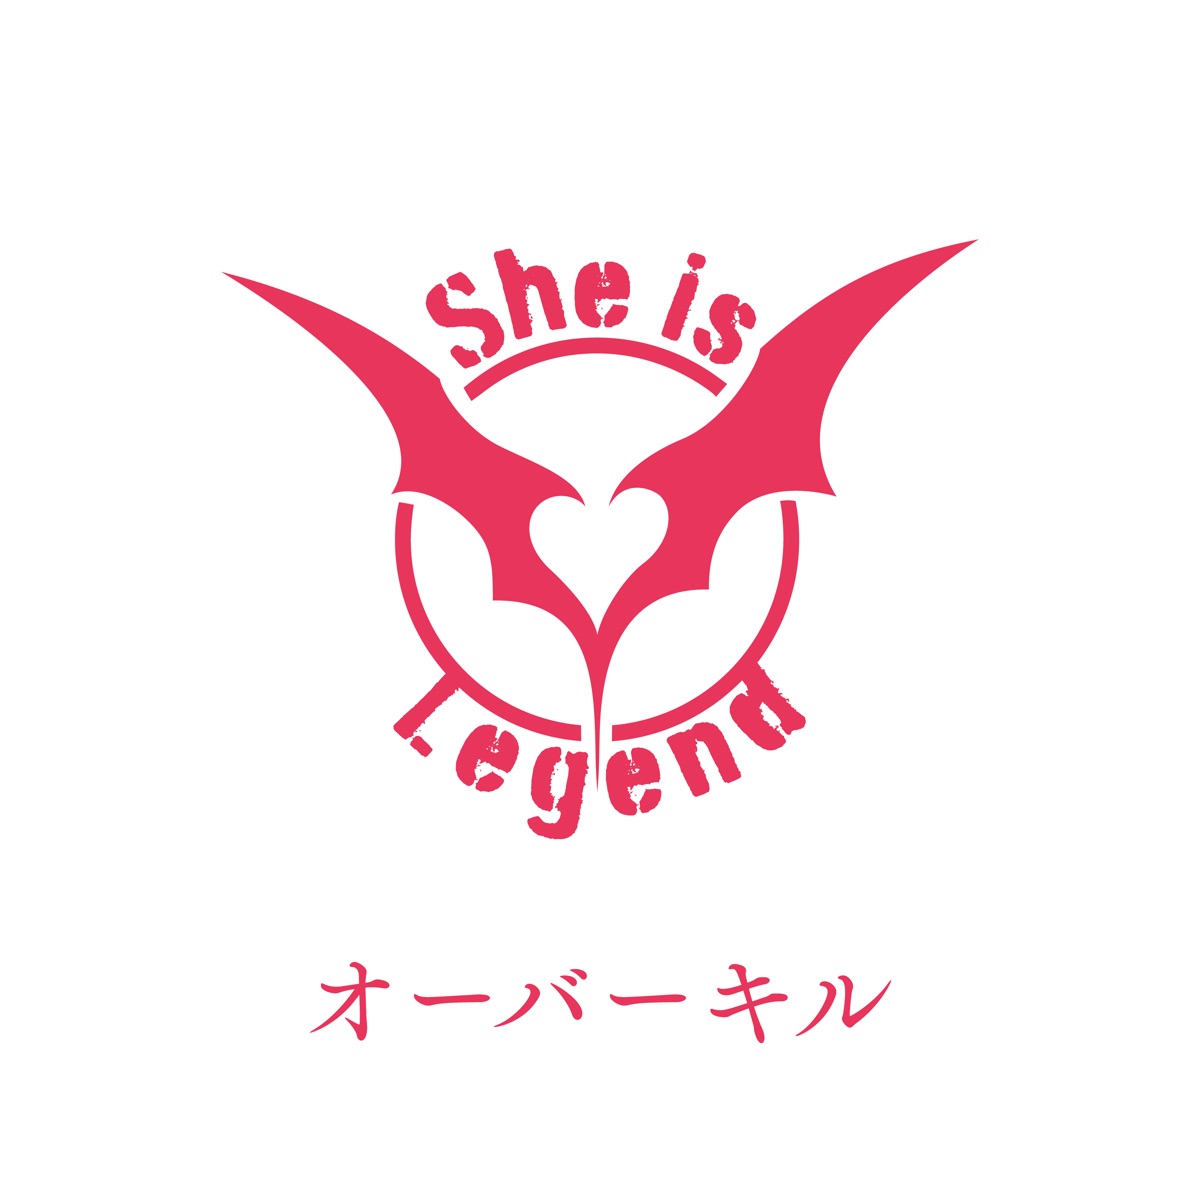 Cover art for『She is Legend - オーバーキル』from the release『Overkill